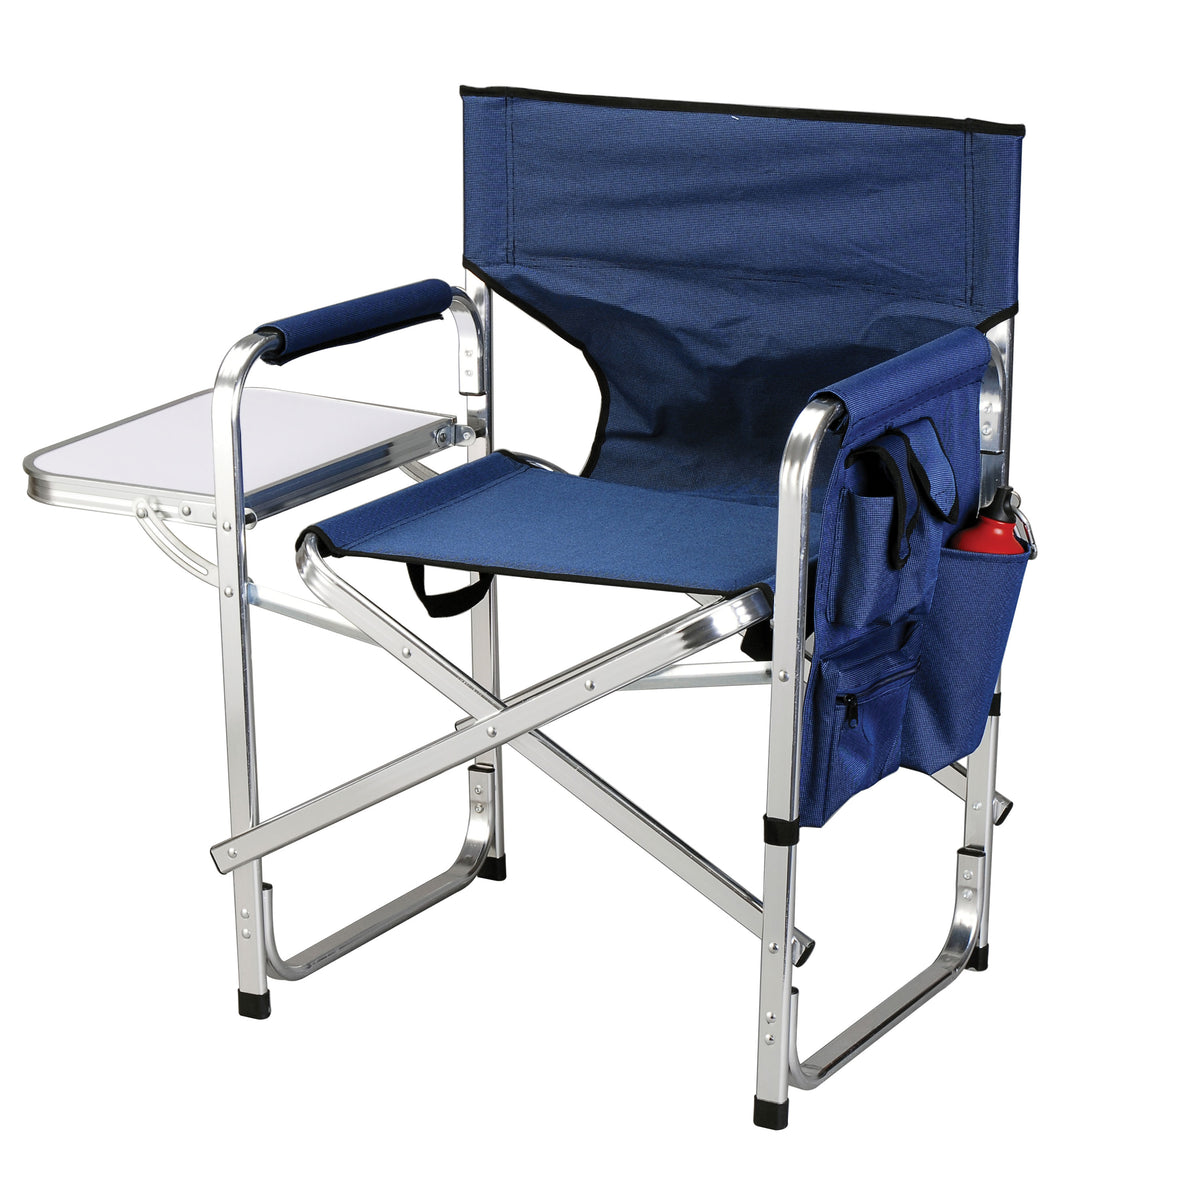 Ming's Mark SL1204-BLUE Stylish Camping Folding Director's Chair - Blue